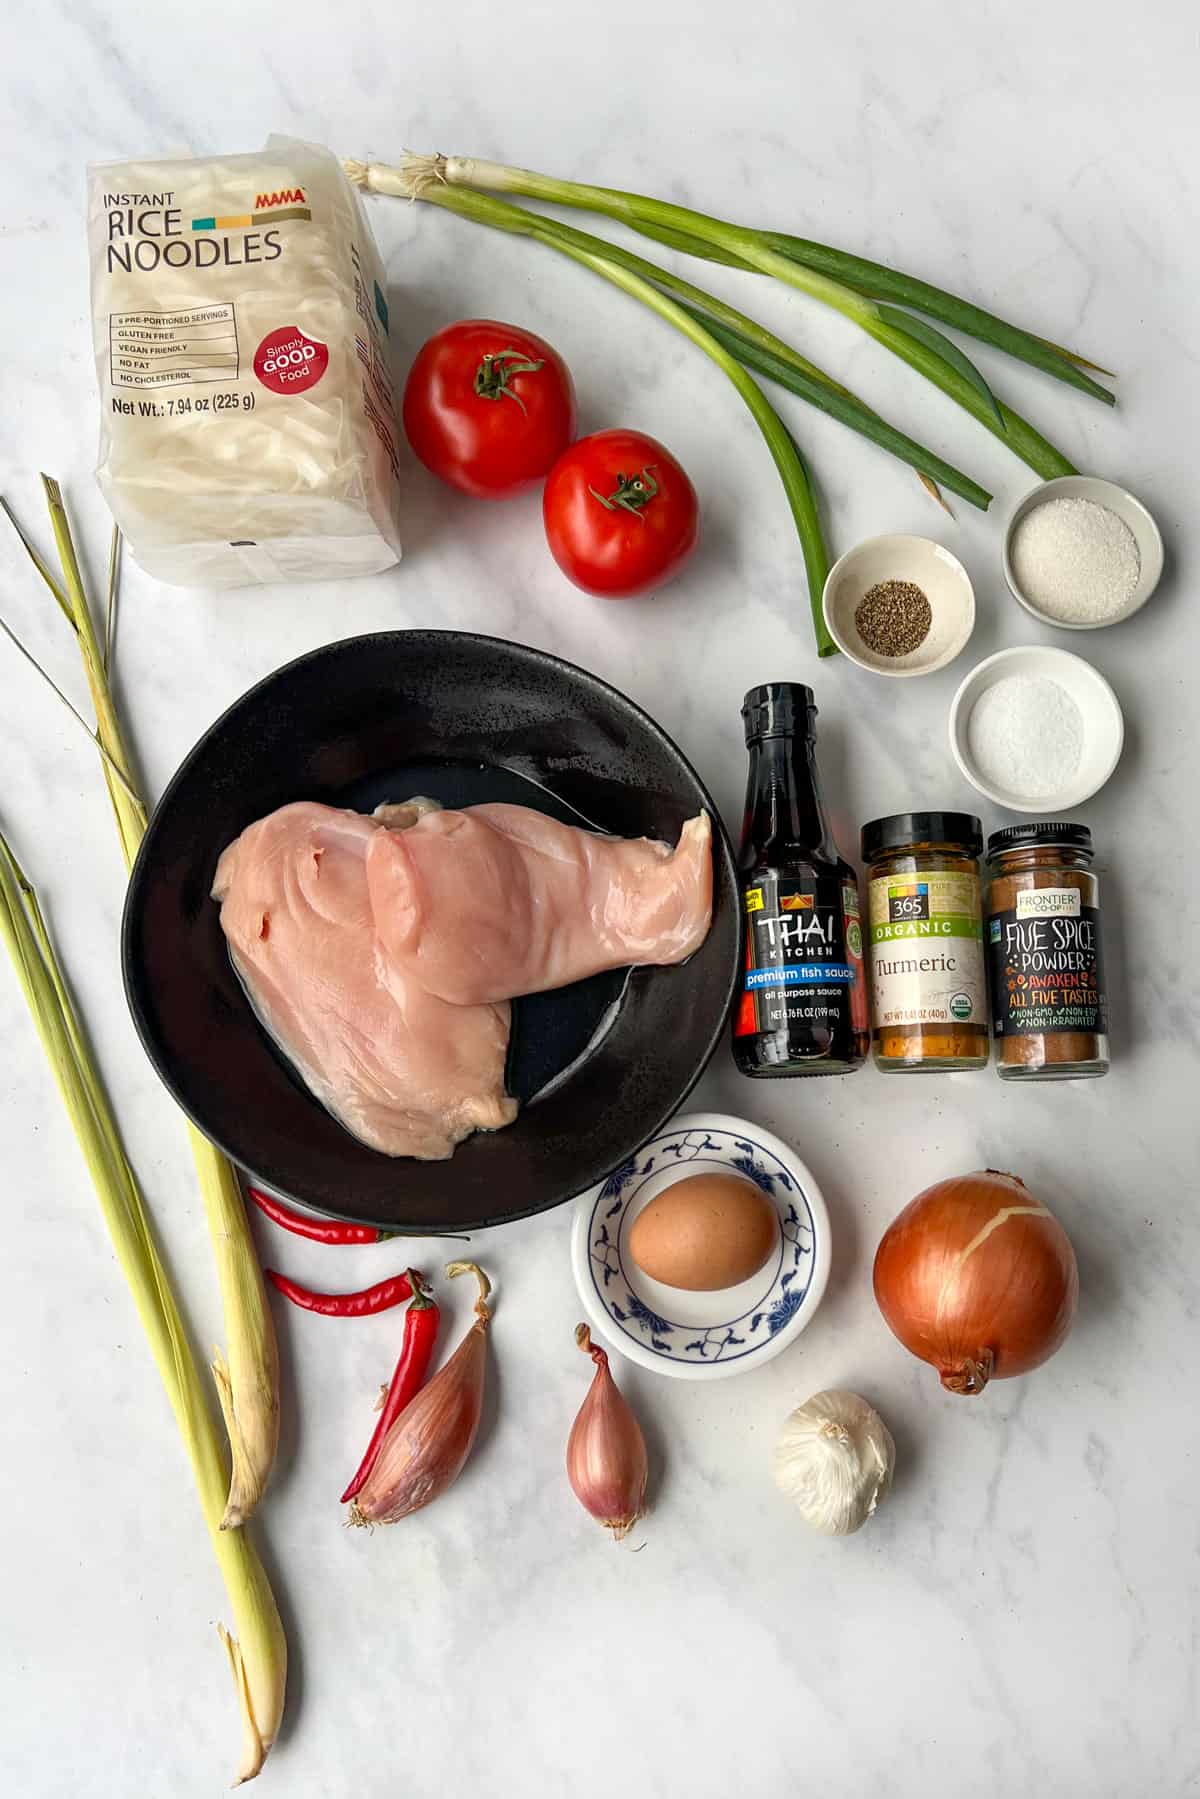 ingredients on a marble countertop: two boneless chicken breasts, two stalks lemongrass, two tomatoes, two scallions, a yellow onion, a shallot, an egg, a garlic bulb, a pack of rice noodles, bottle of fish sauce, jar of turmeric, gar of 5 spice powder.